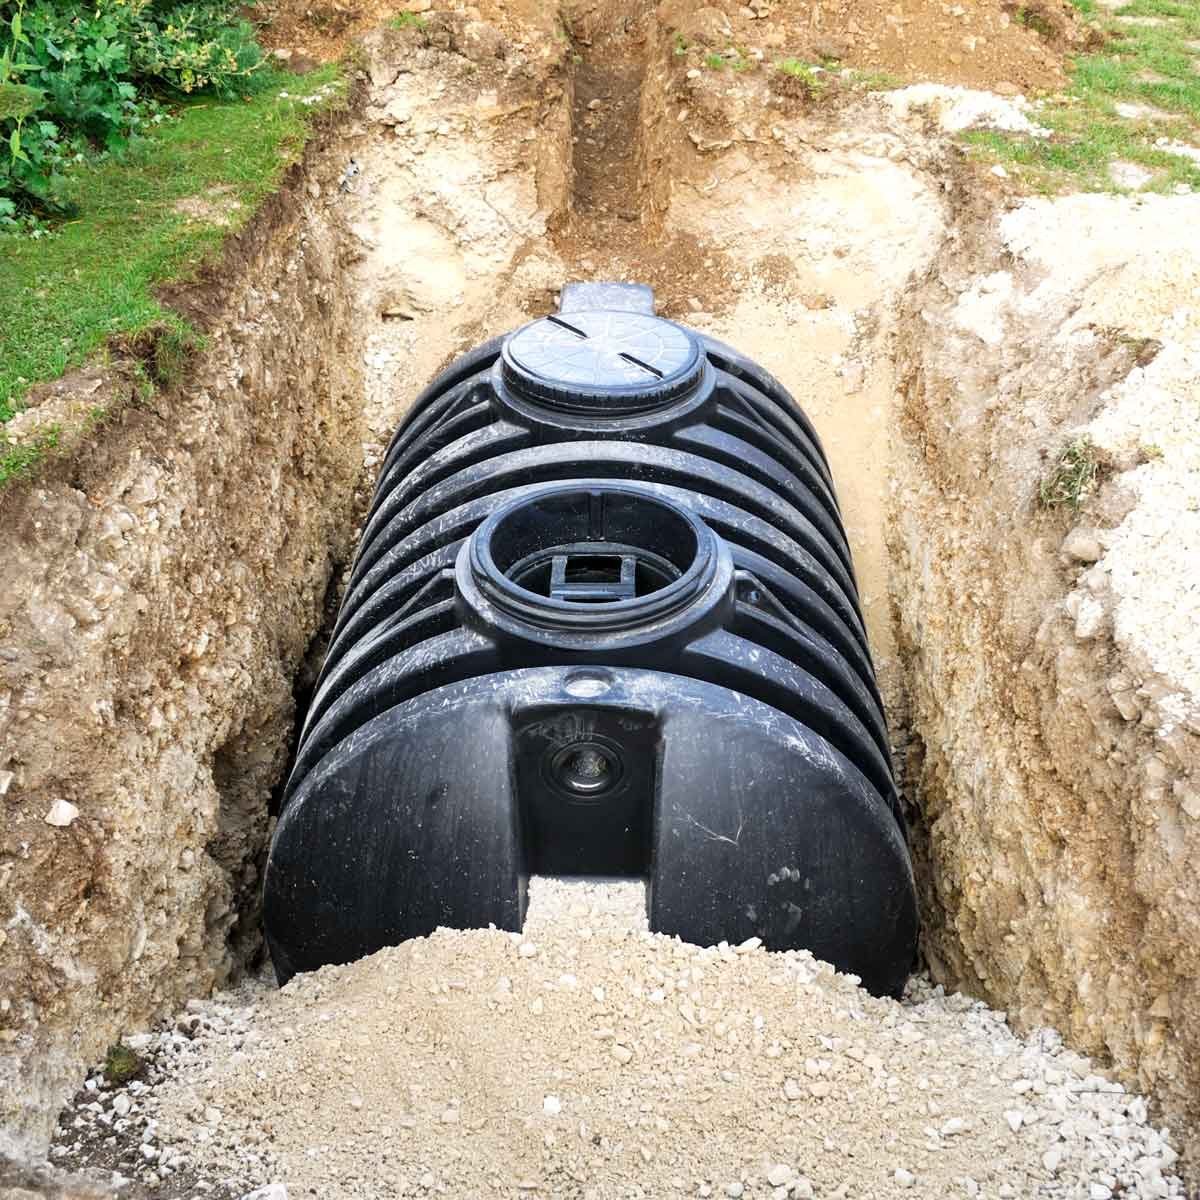 Above Ground Septic Tanks  Plastic Holding Septic Tanks